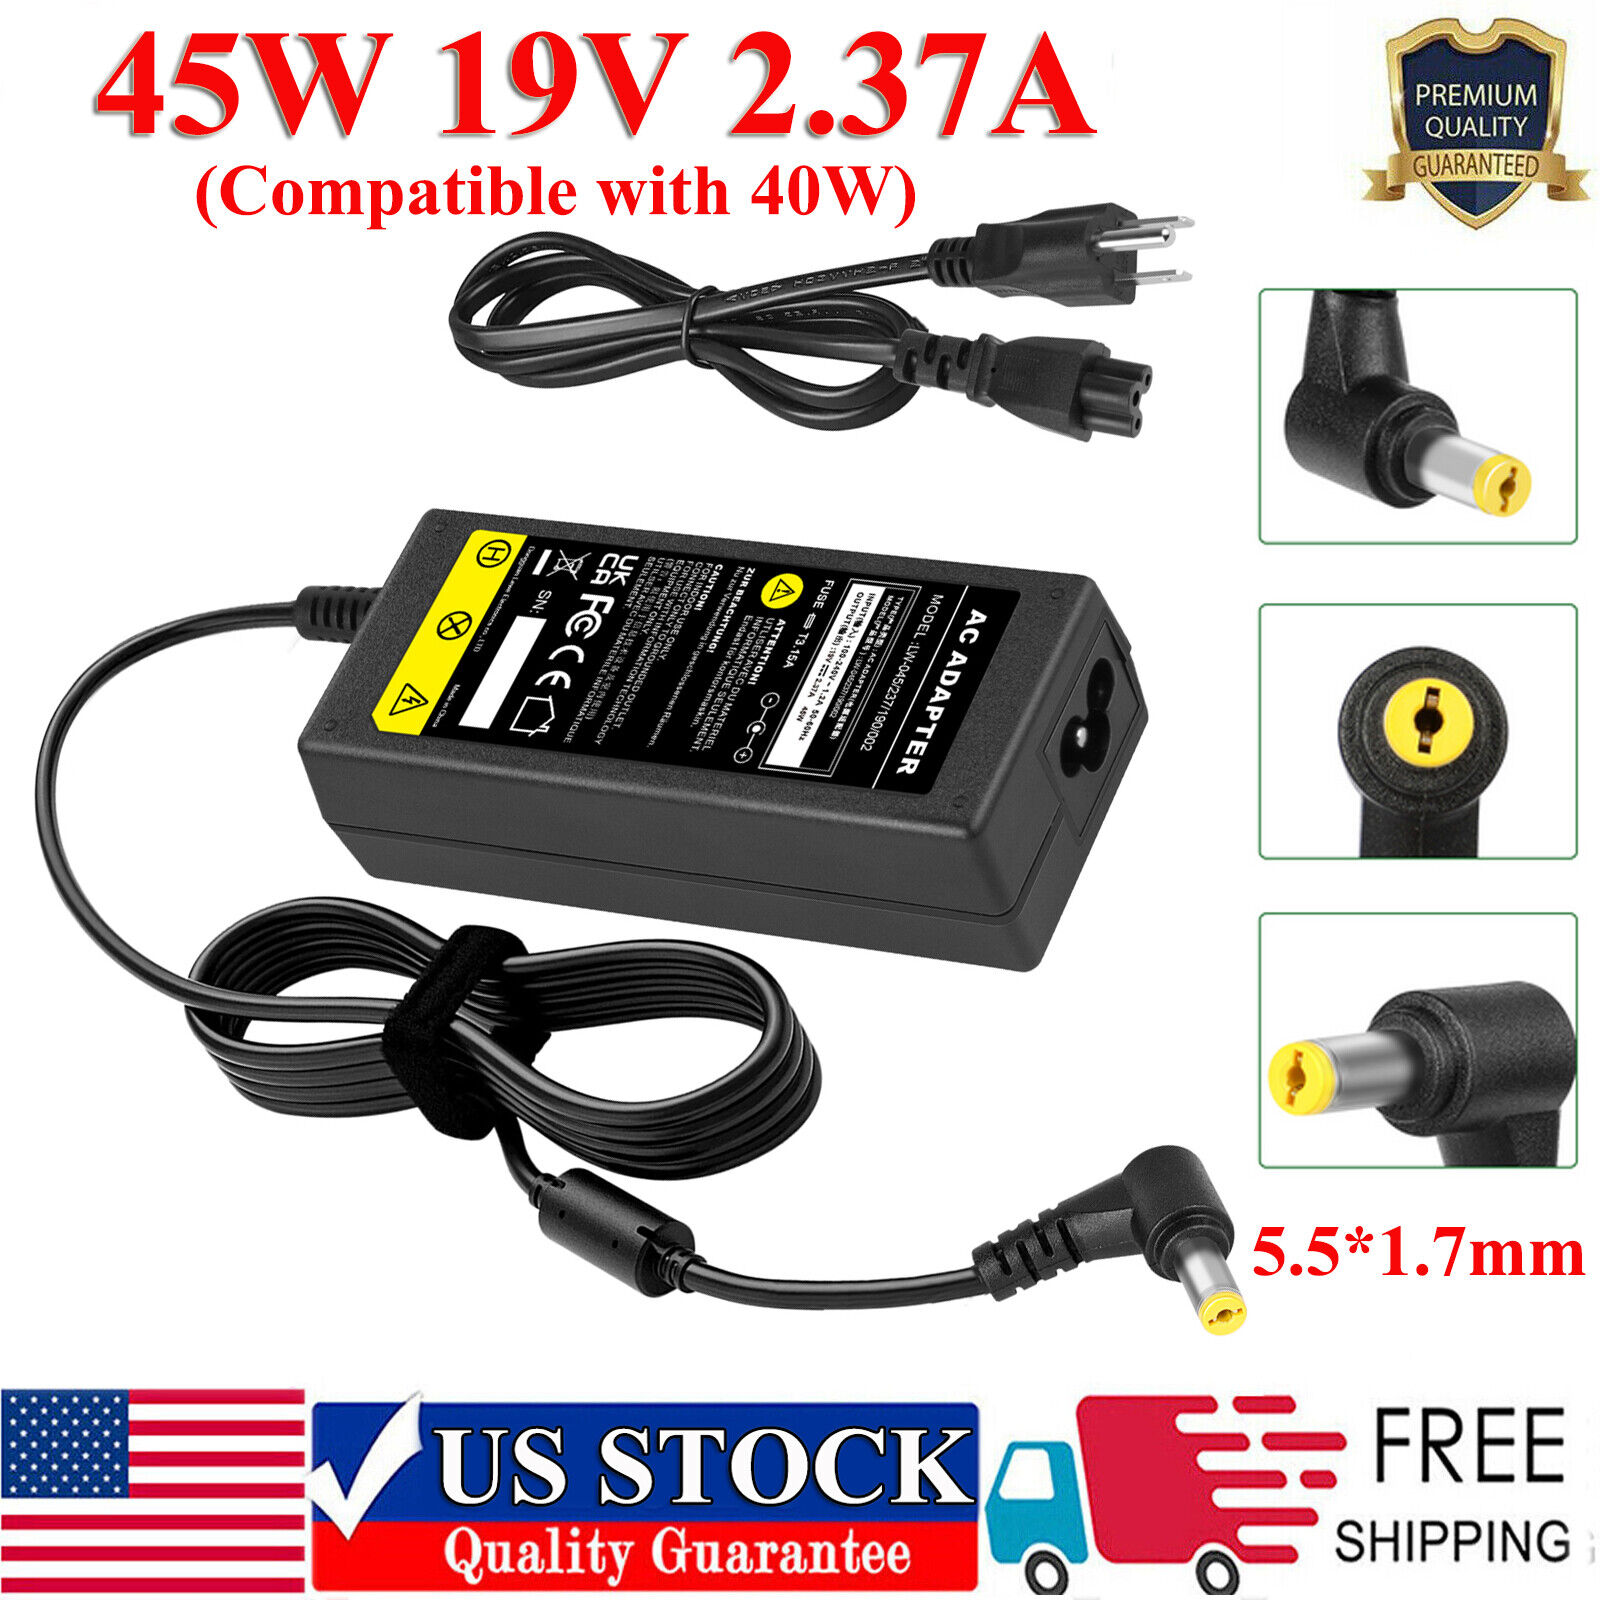 45W AC Adapter Charger for Acer Aspire One KAV60 AOD270 D270 D260 AO522 522 725